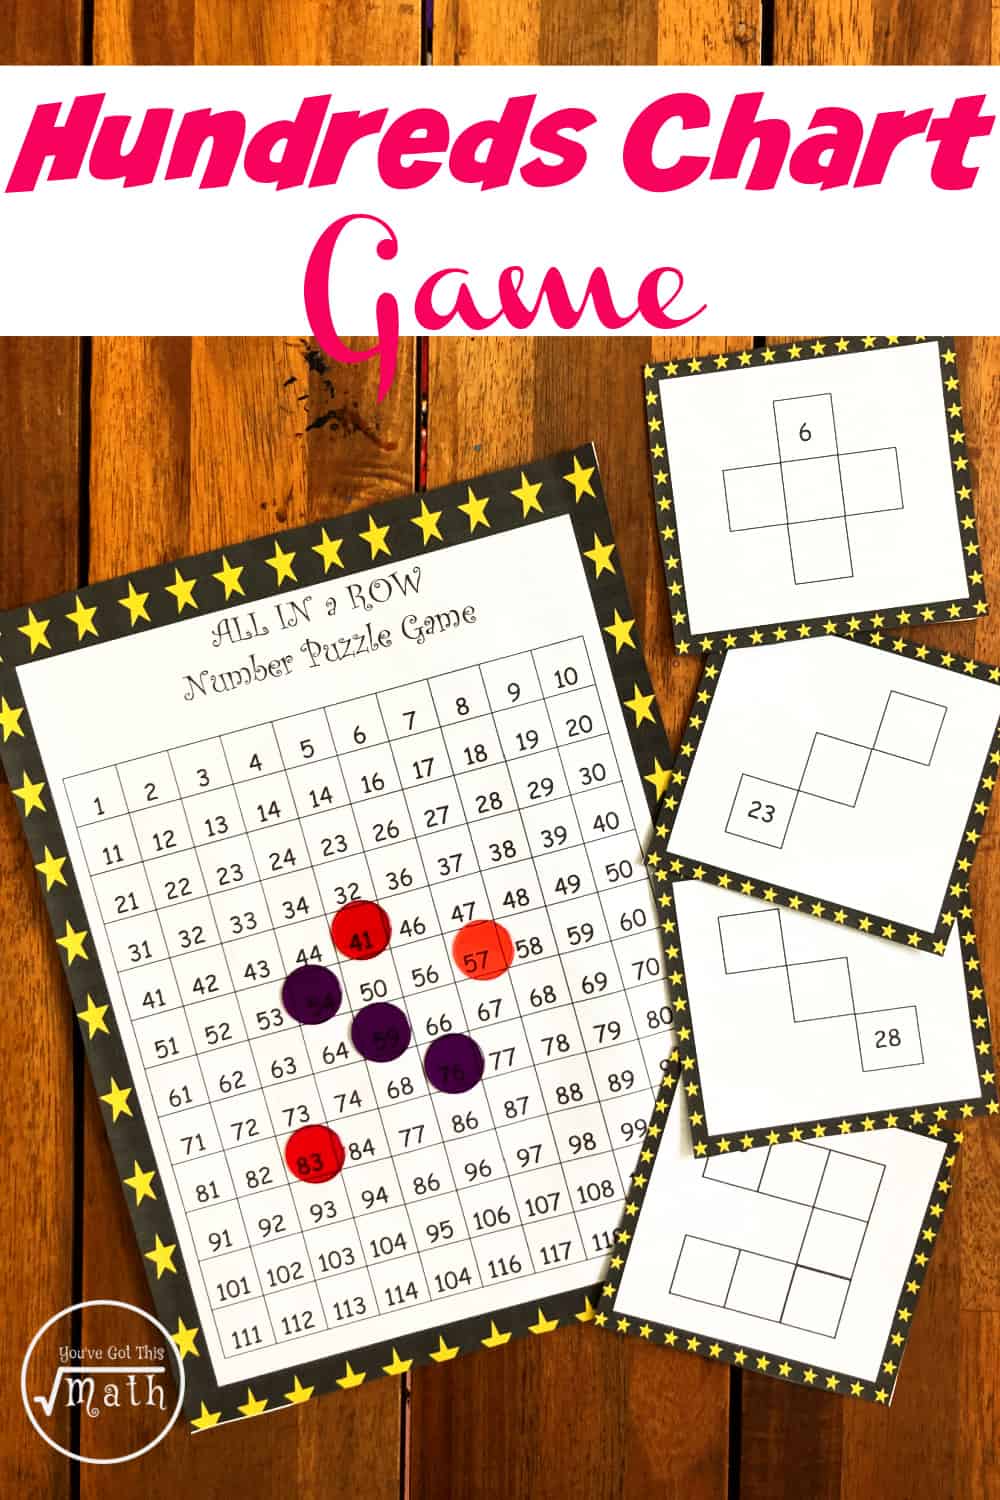 Here's a FREE Number Puzzle Game to Develop Number Sense